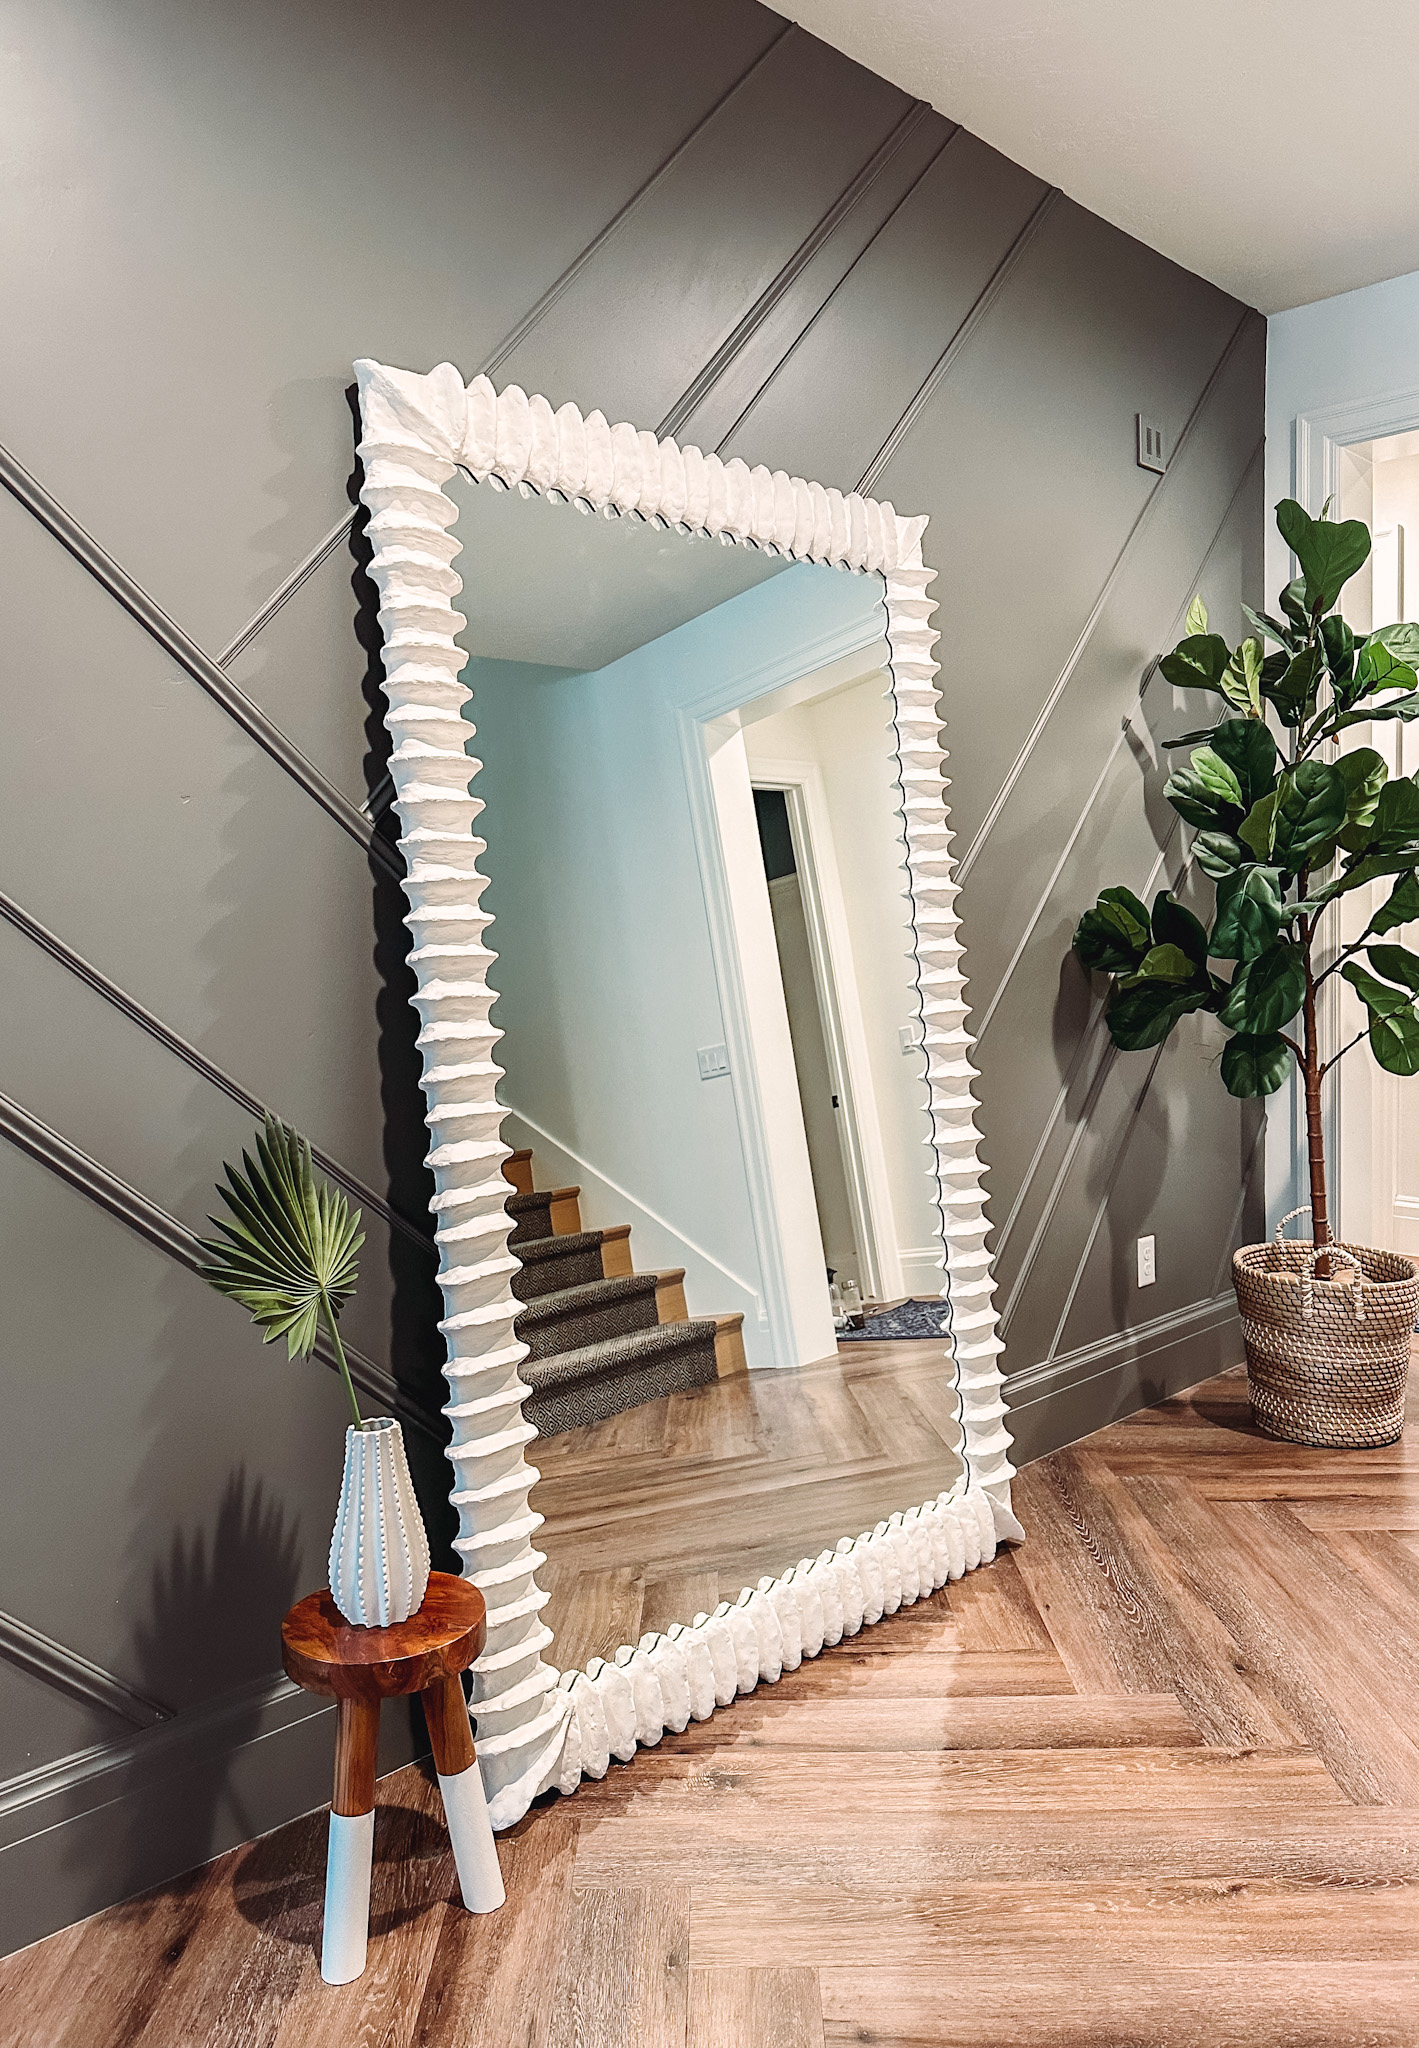 How to Paint Plastic Mirror - Decorative Inspirations